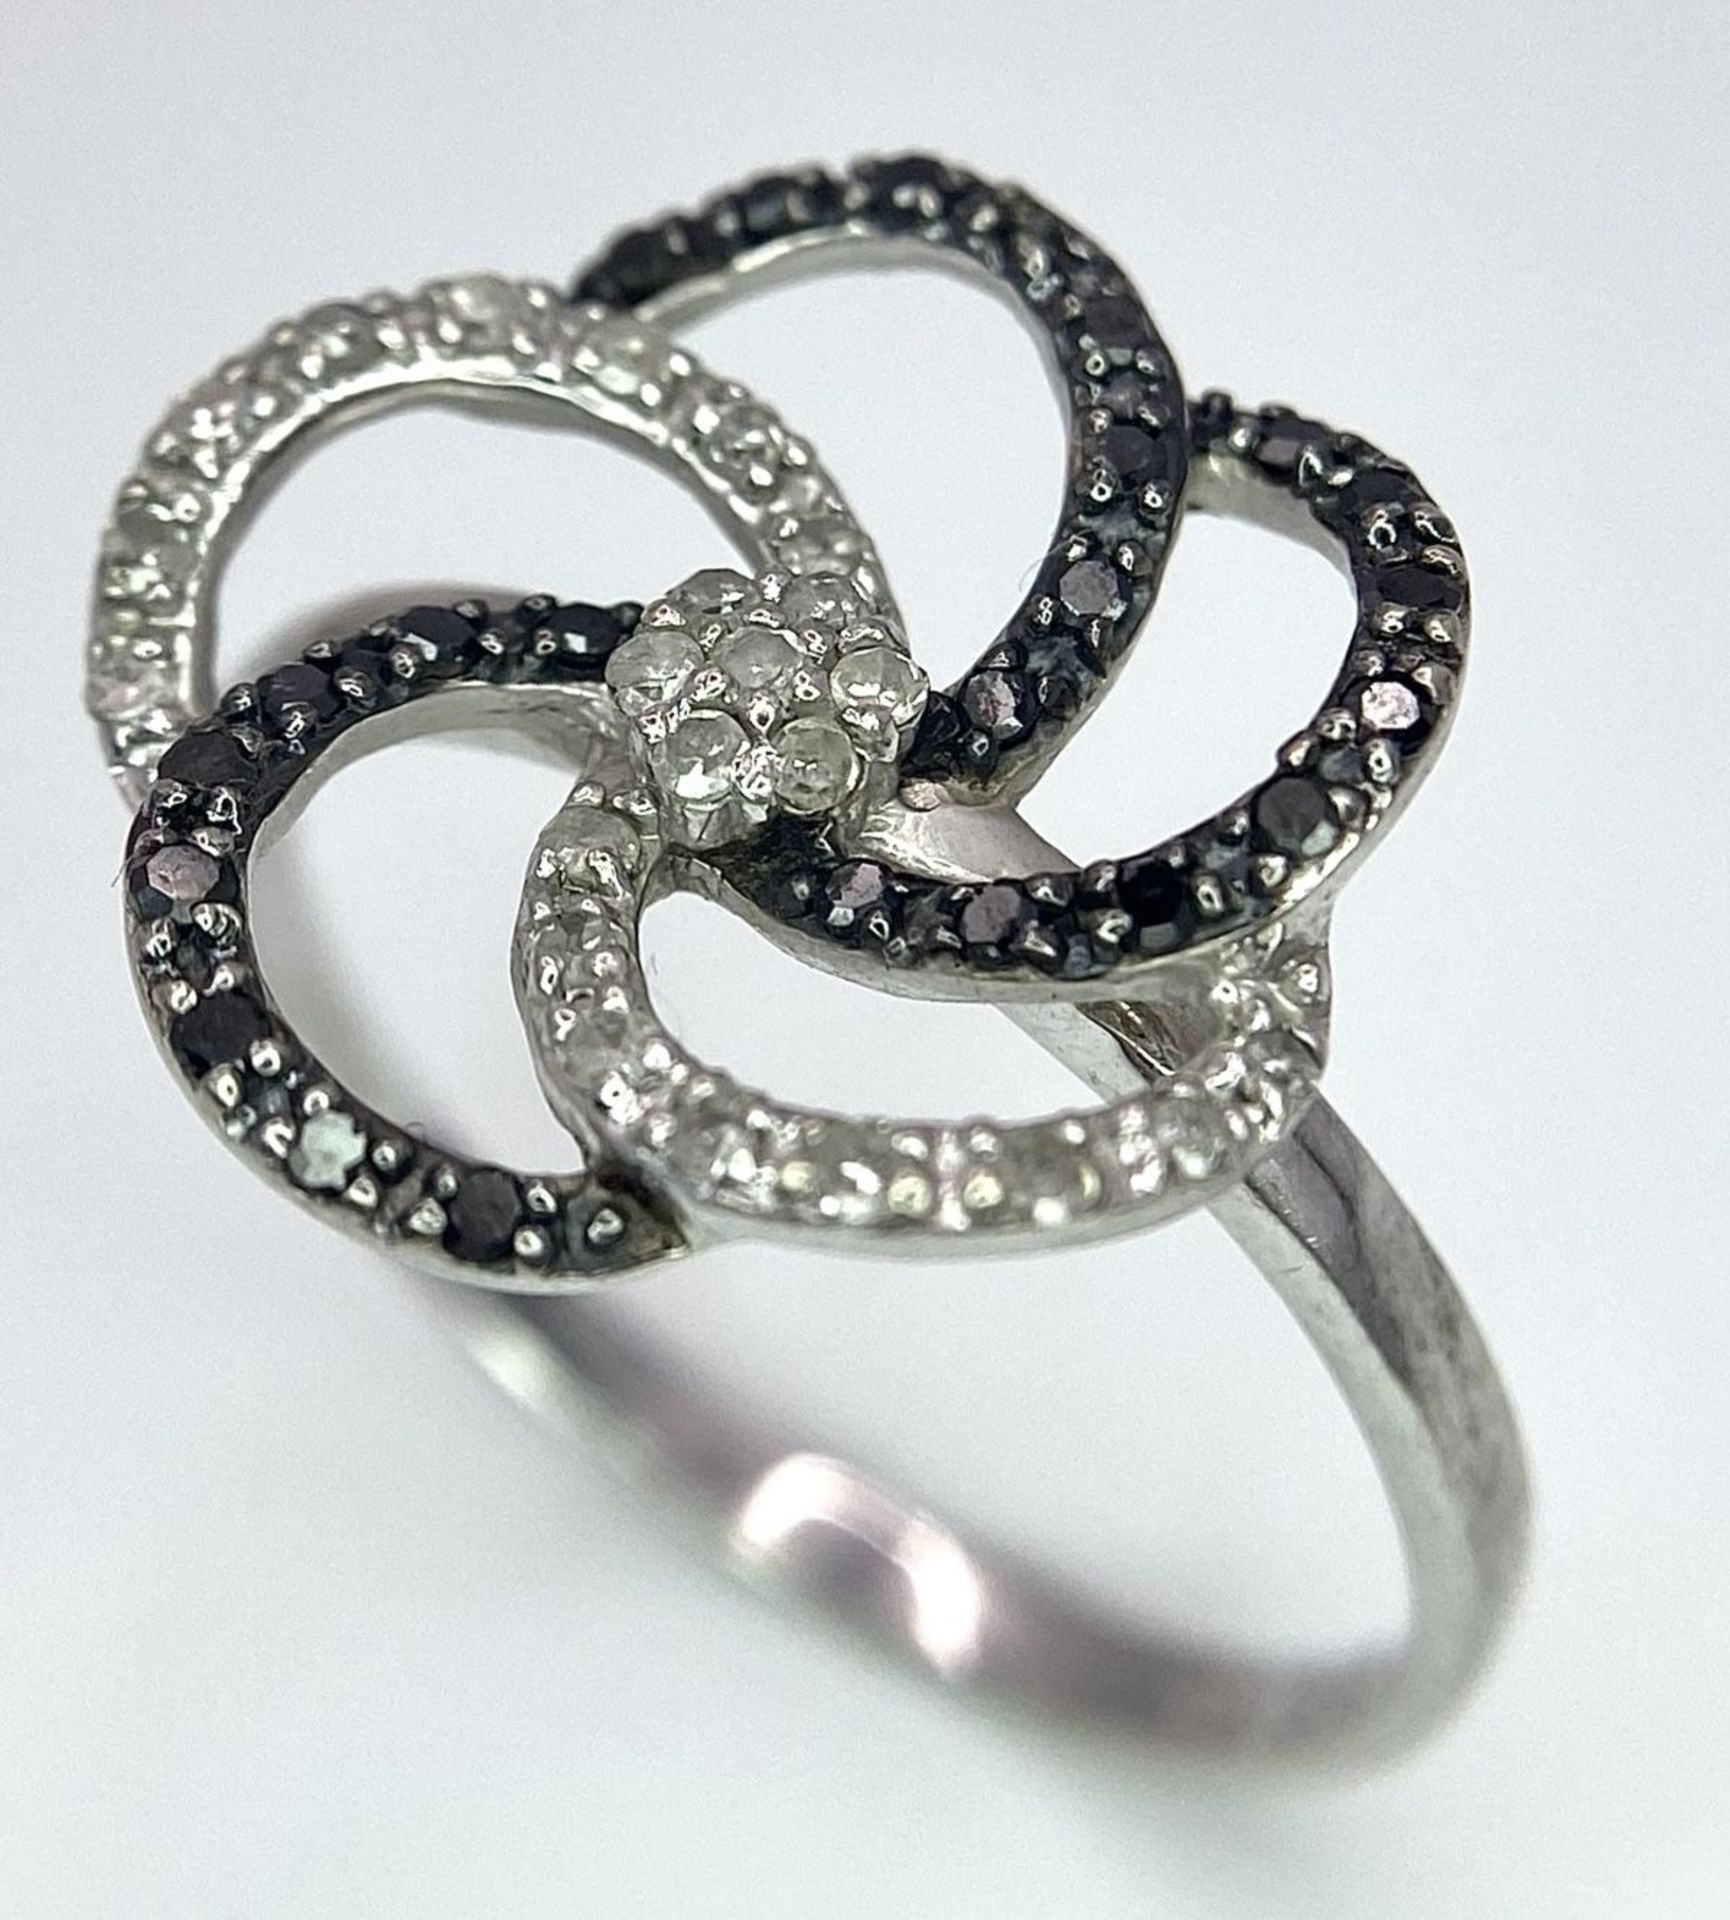 A 9K White Gold Black ad White Diamond Decorative Floral Ring. Size N. 2g total weight. - Image 5 of 7